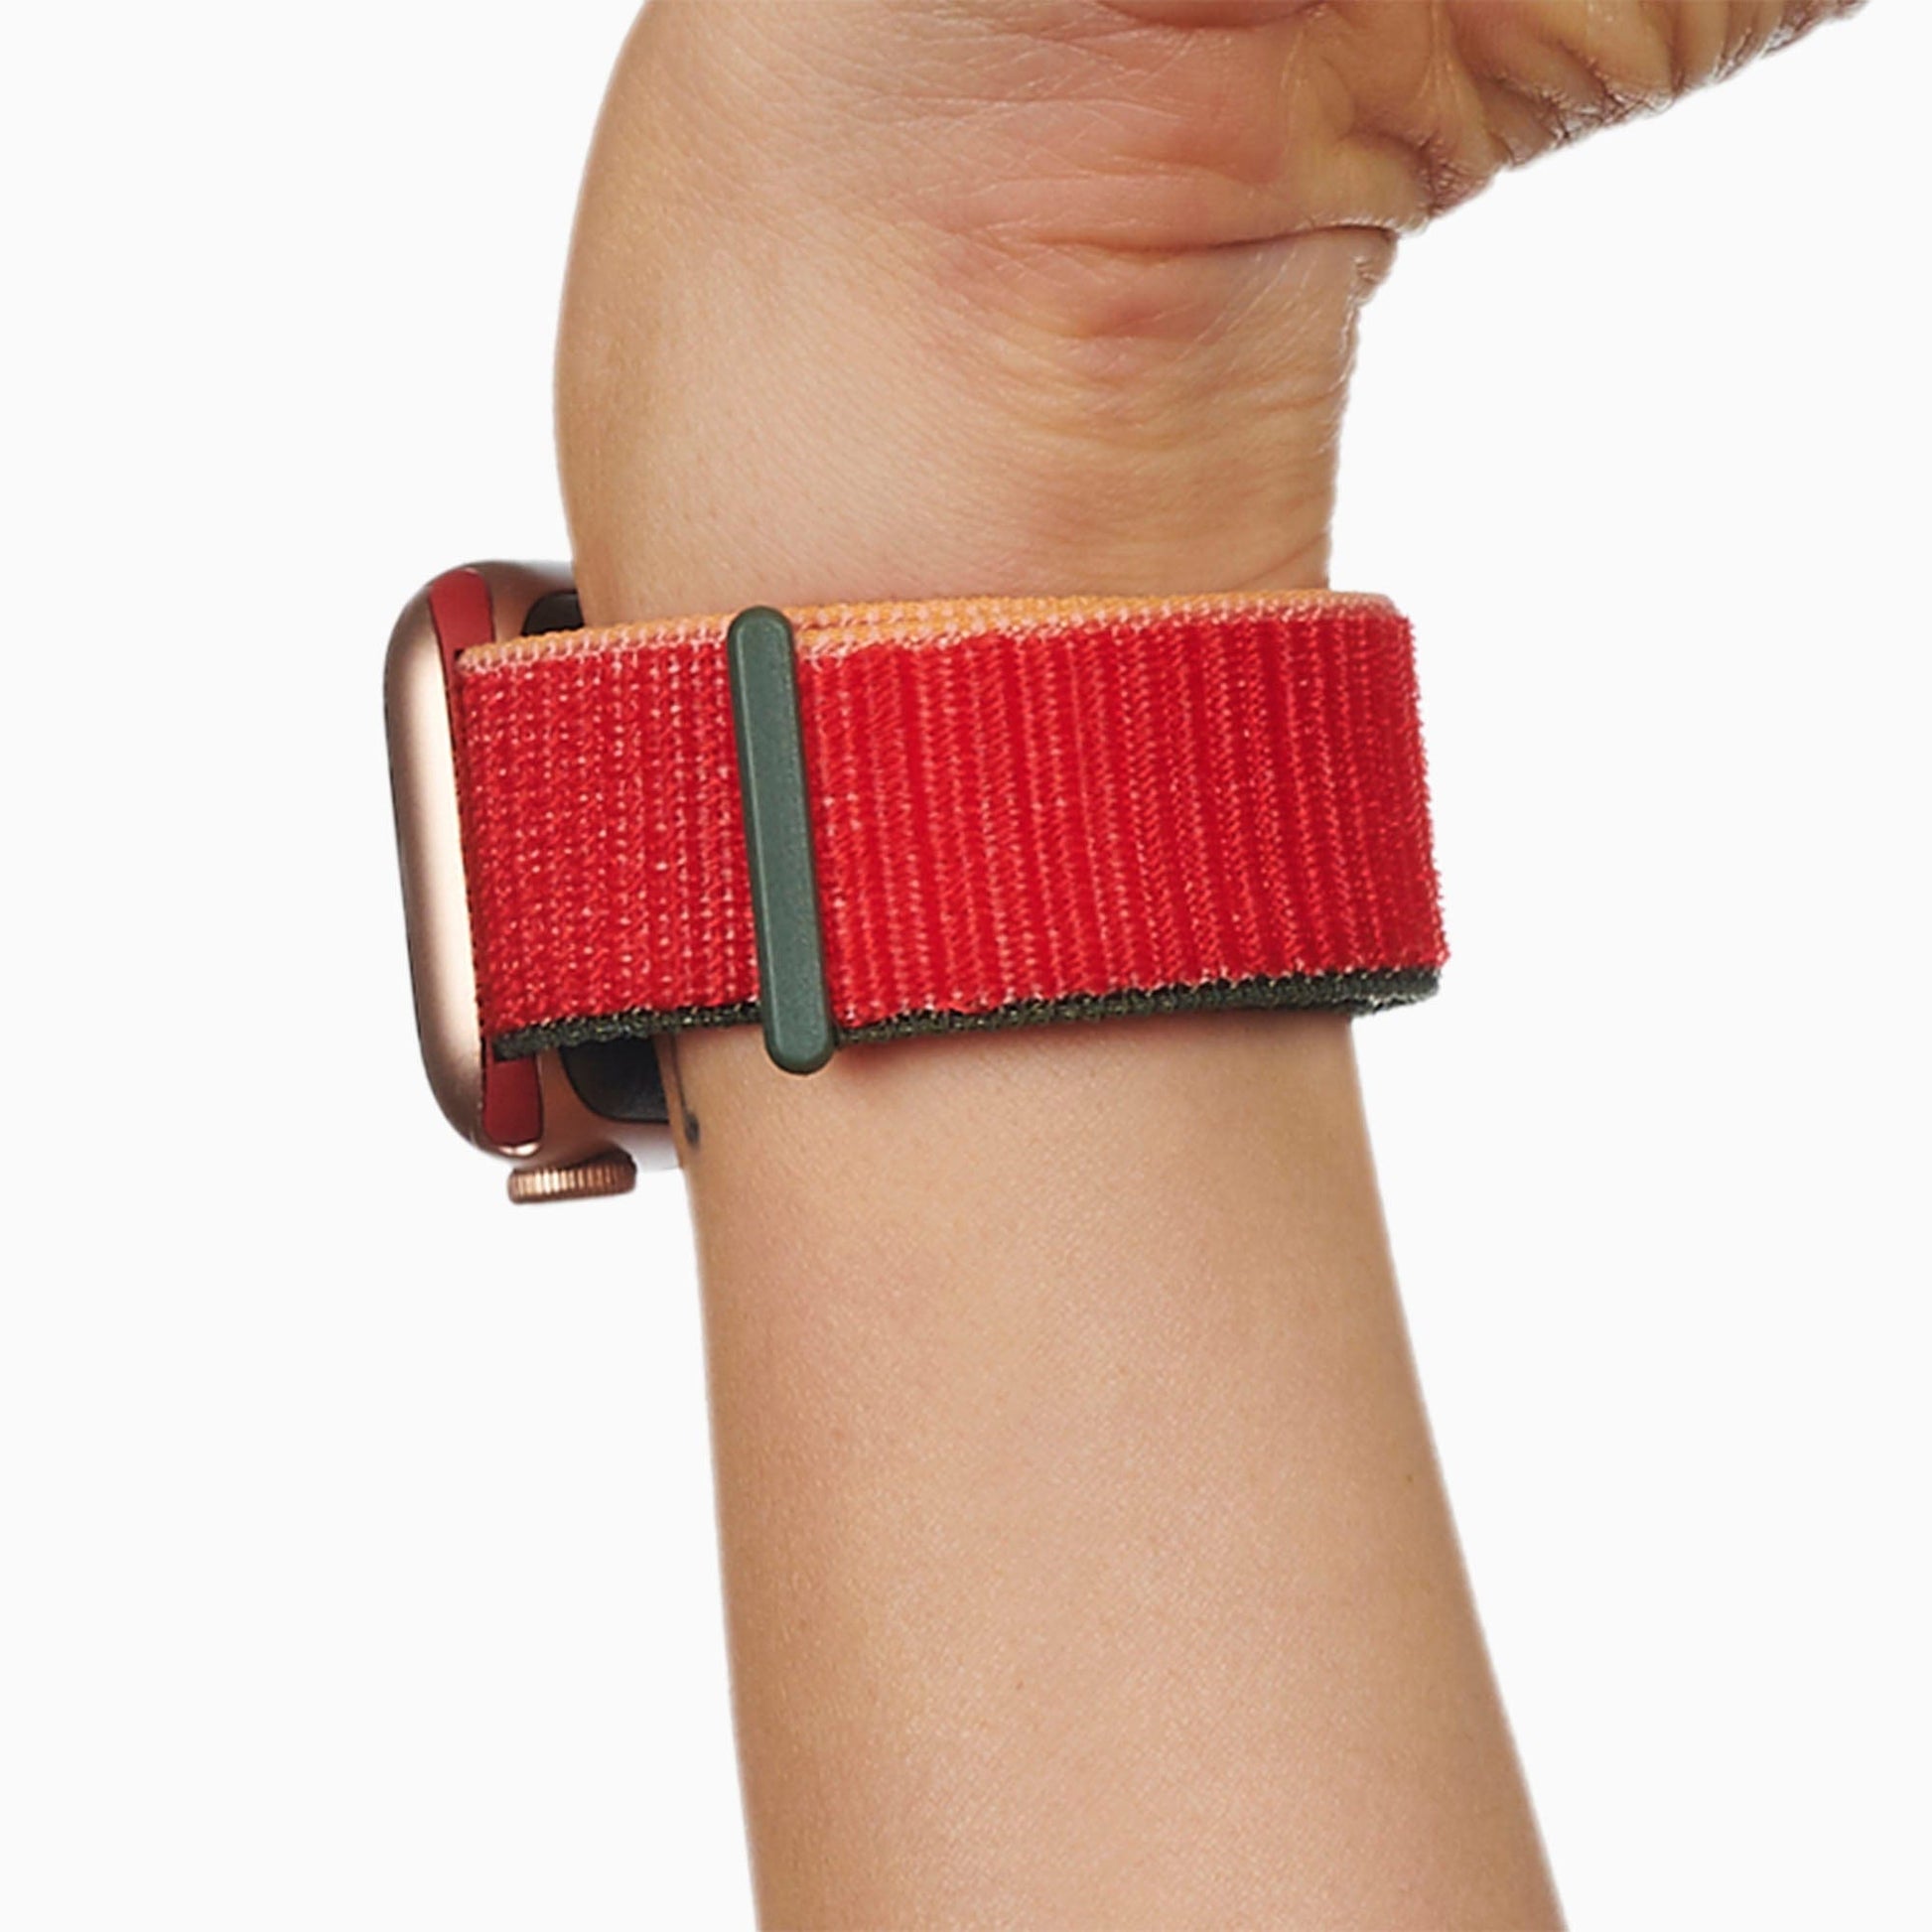 Candy Apple Red Sport Loop for Apple Watch